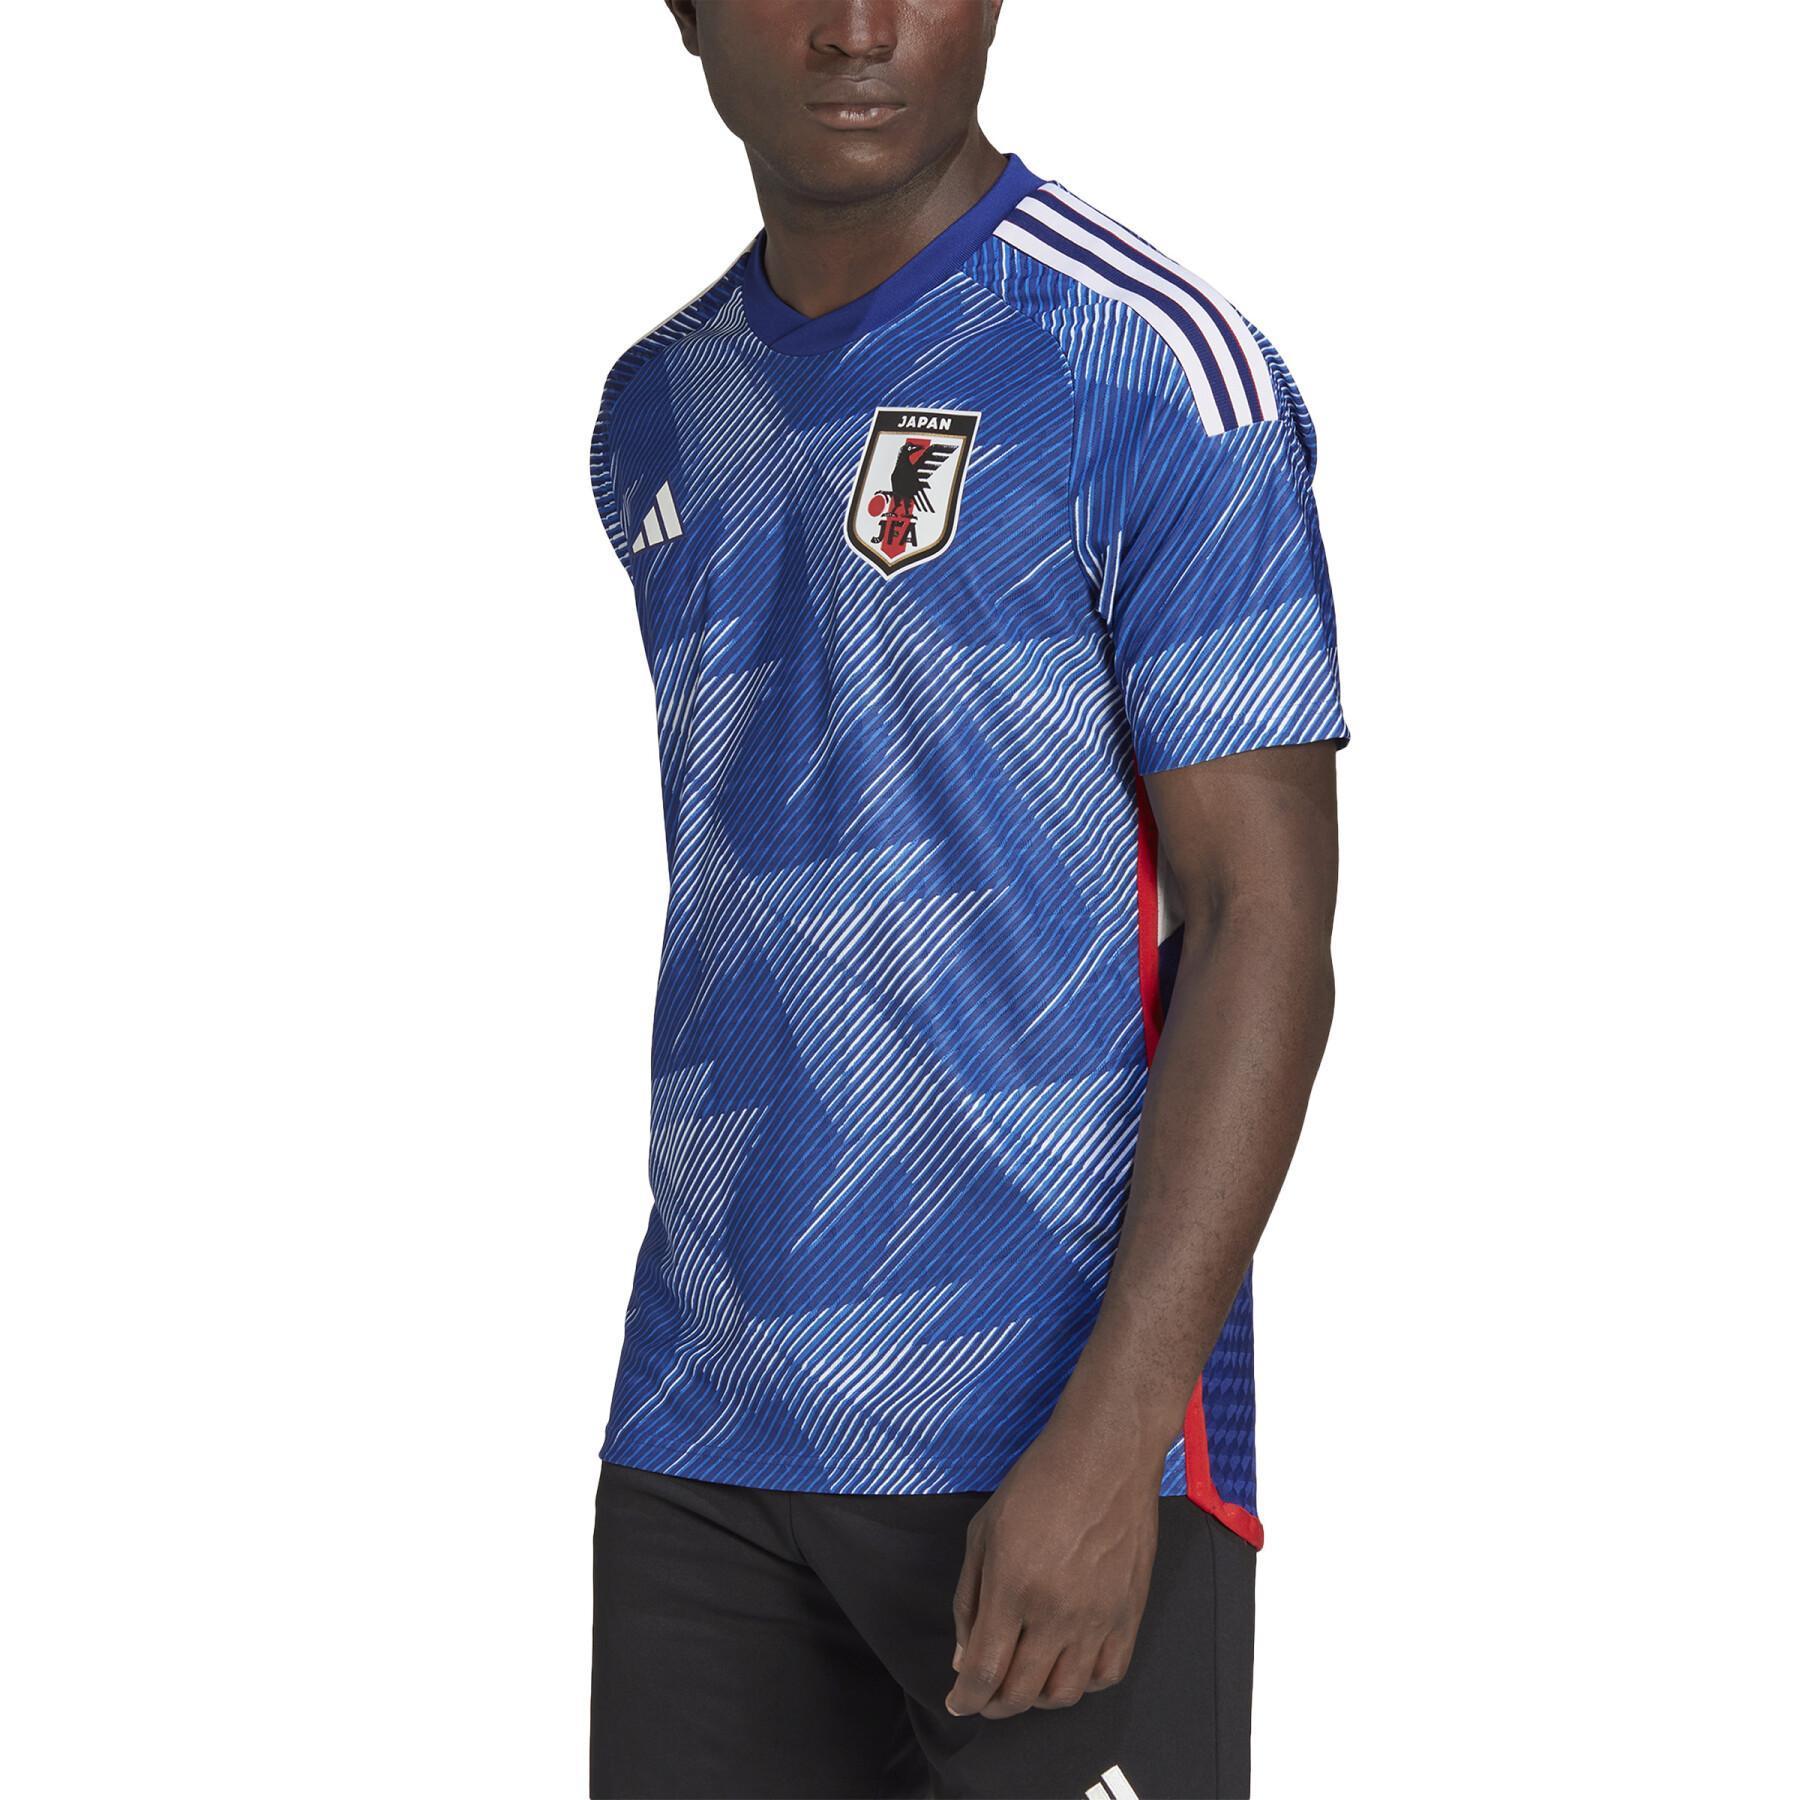 Authentic World Cup 2022 home jersey Japon